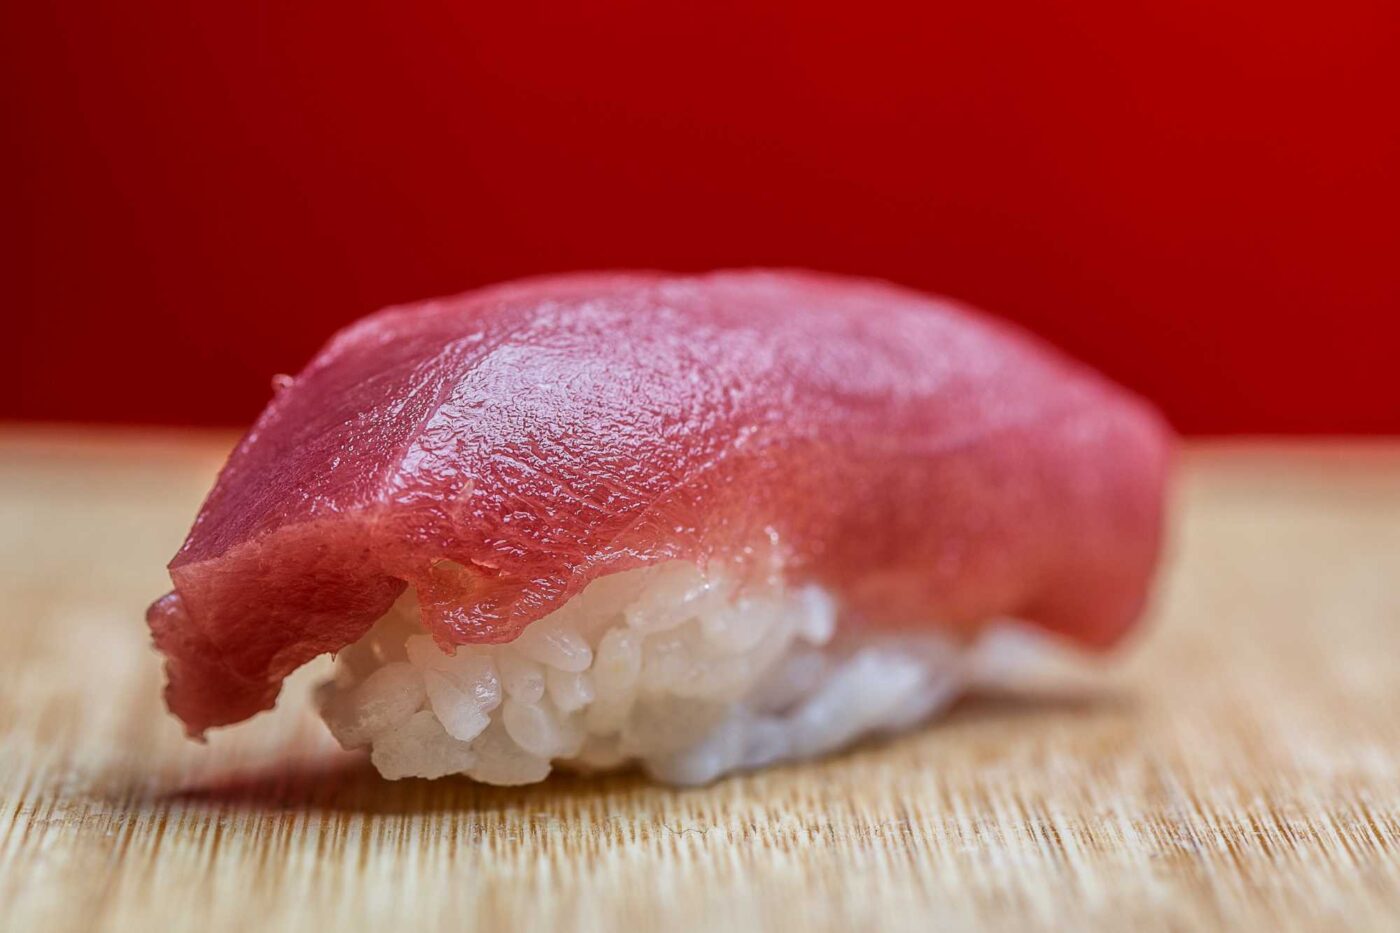 What are some etiquette rules for sushi chefs?